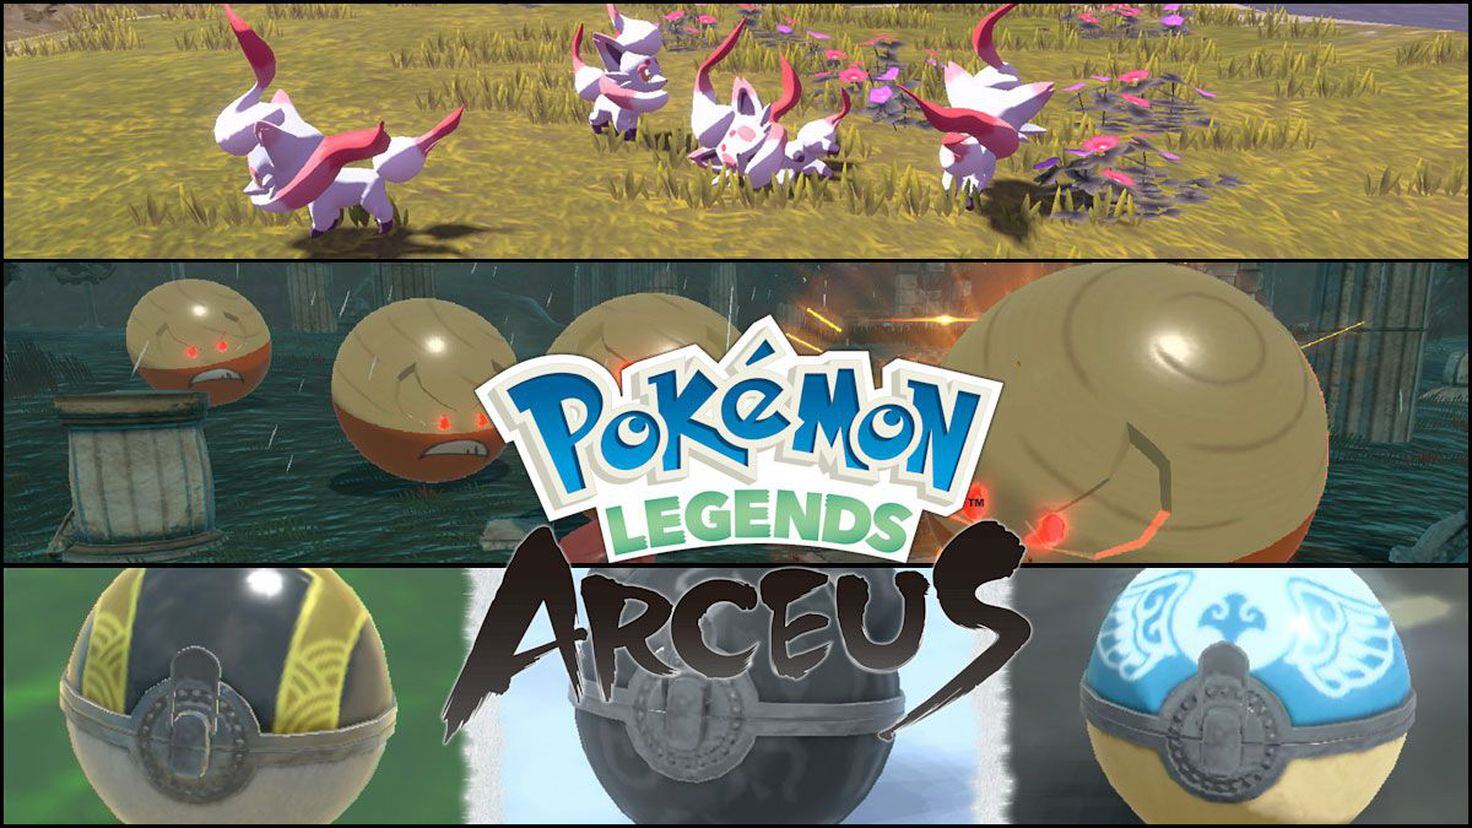 Pokémon Legends Arceus receives update 1.1.0. Check out all the new  features and gifts - Meristation